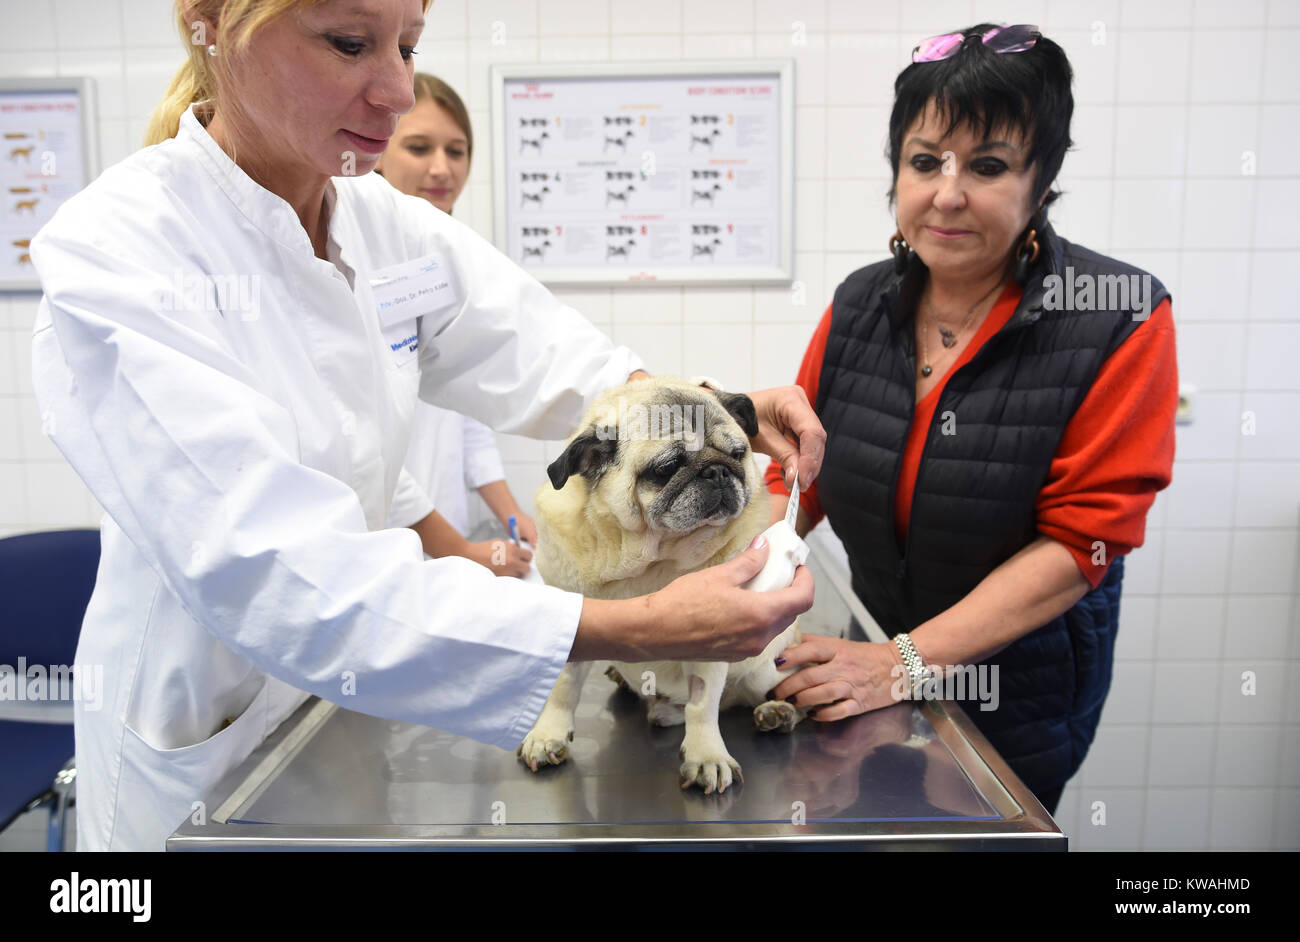 Dr Uschi High Resolution Stock Photography and Images - Alamy